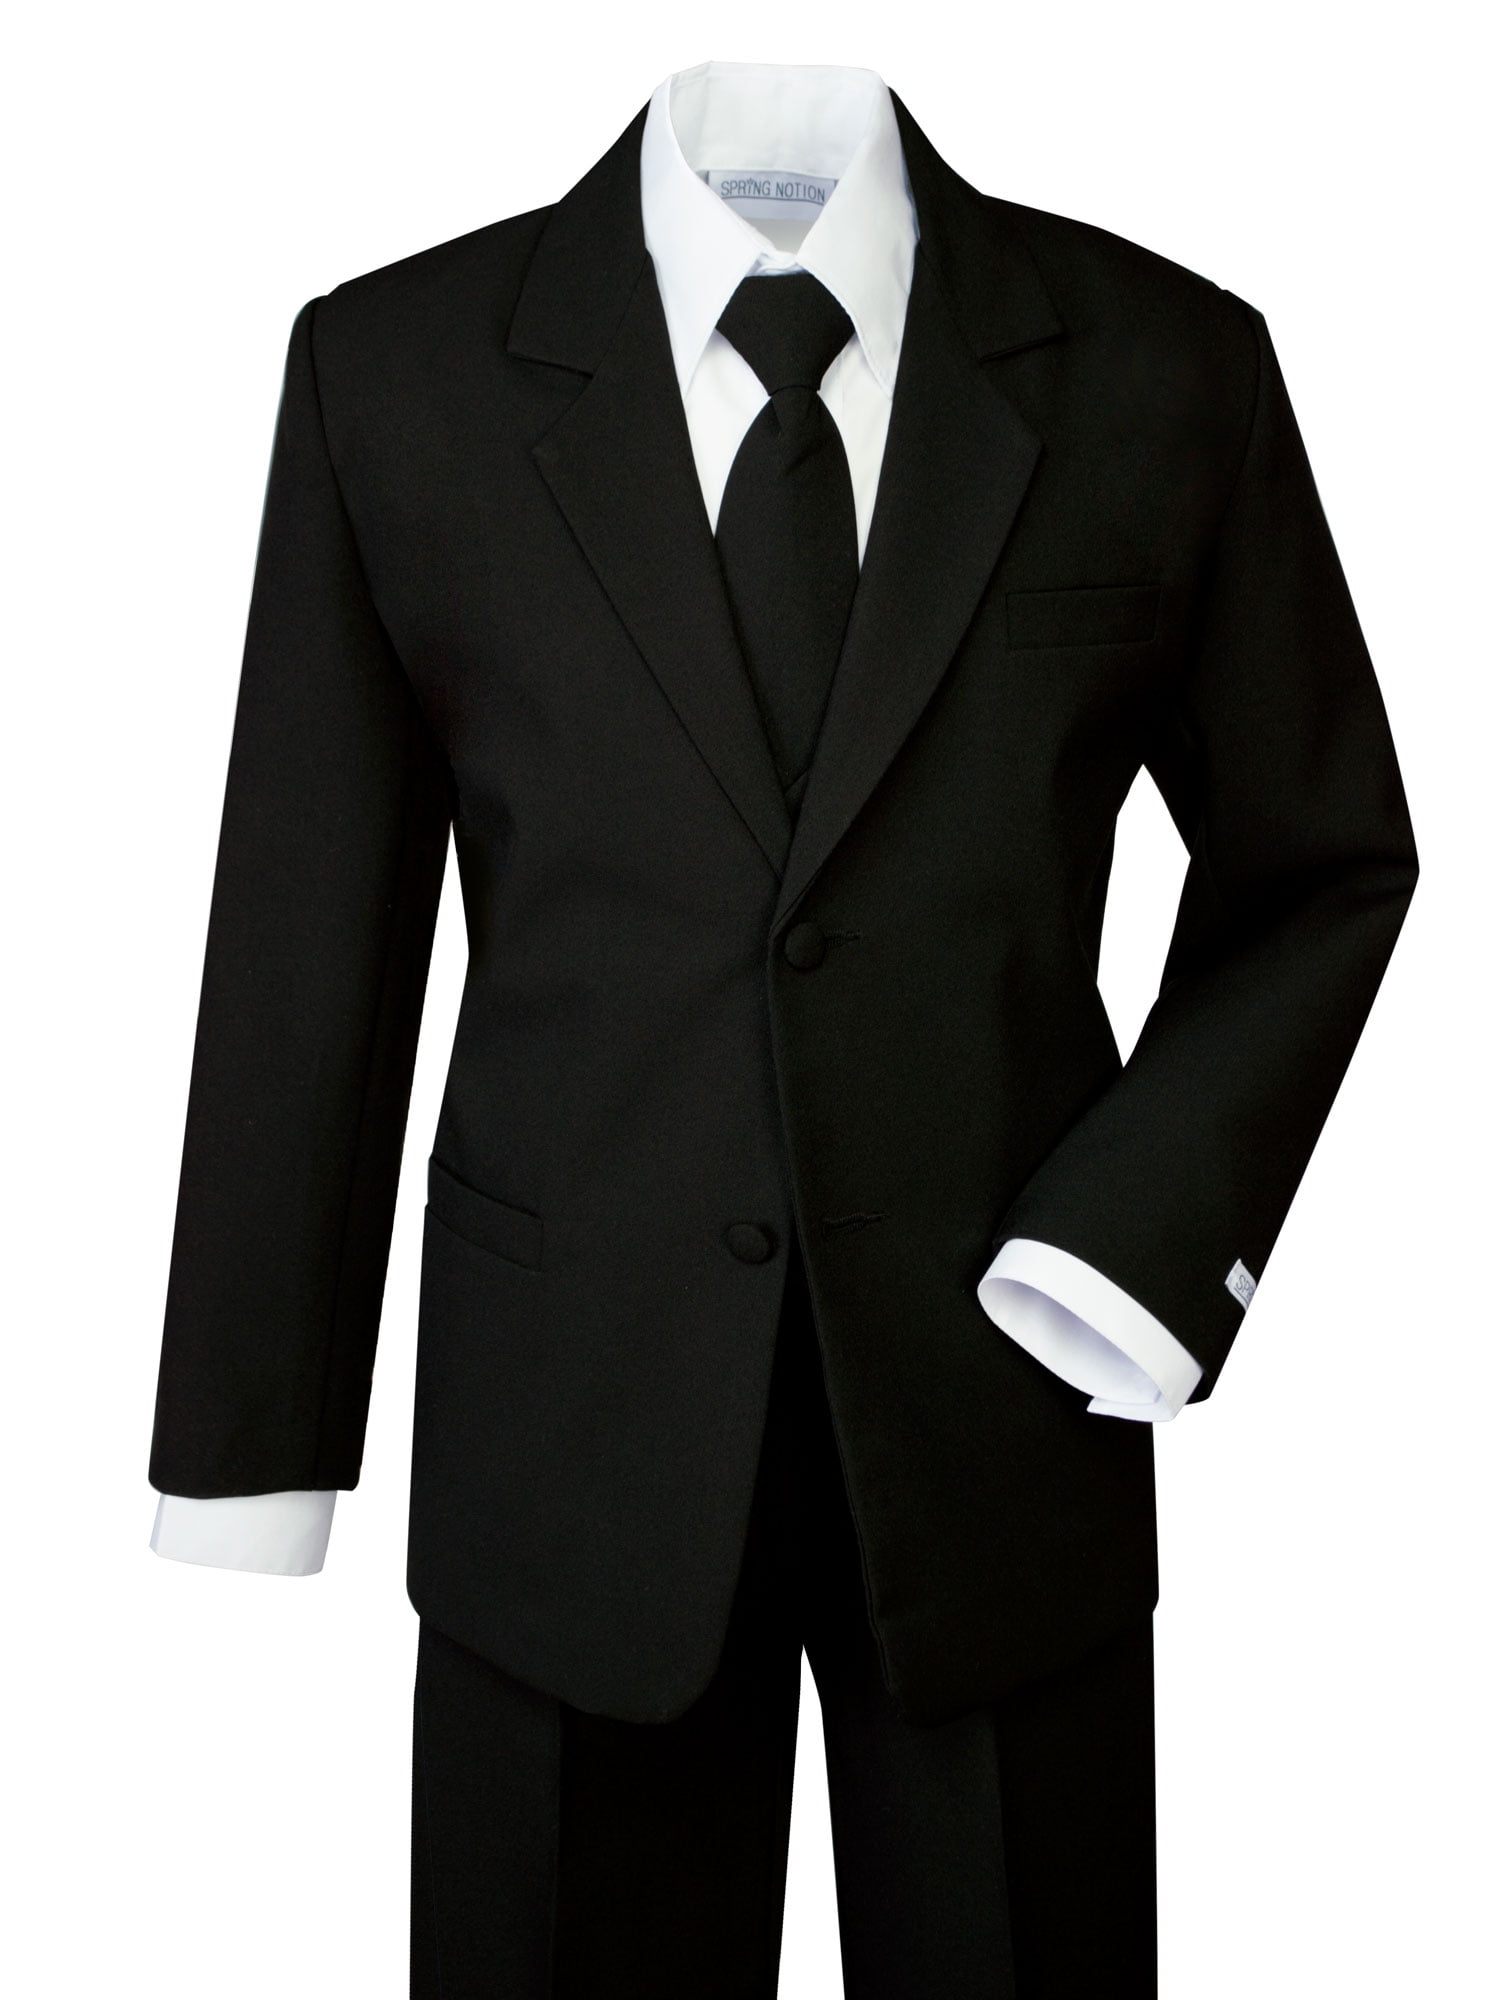 American Exchange Boys Little Solid Vested Suit 